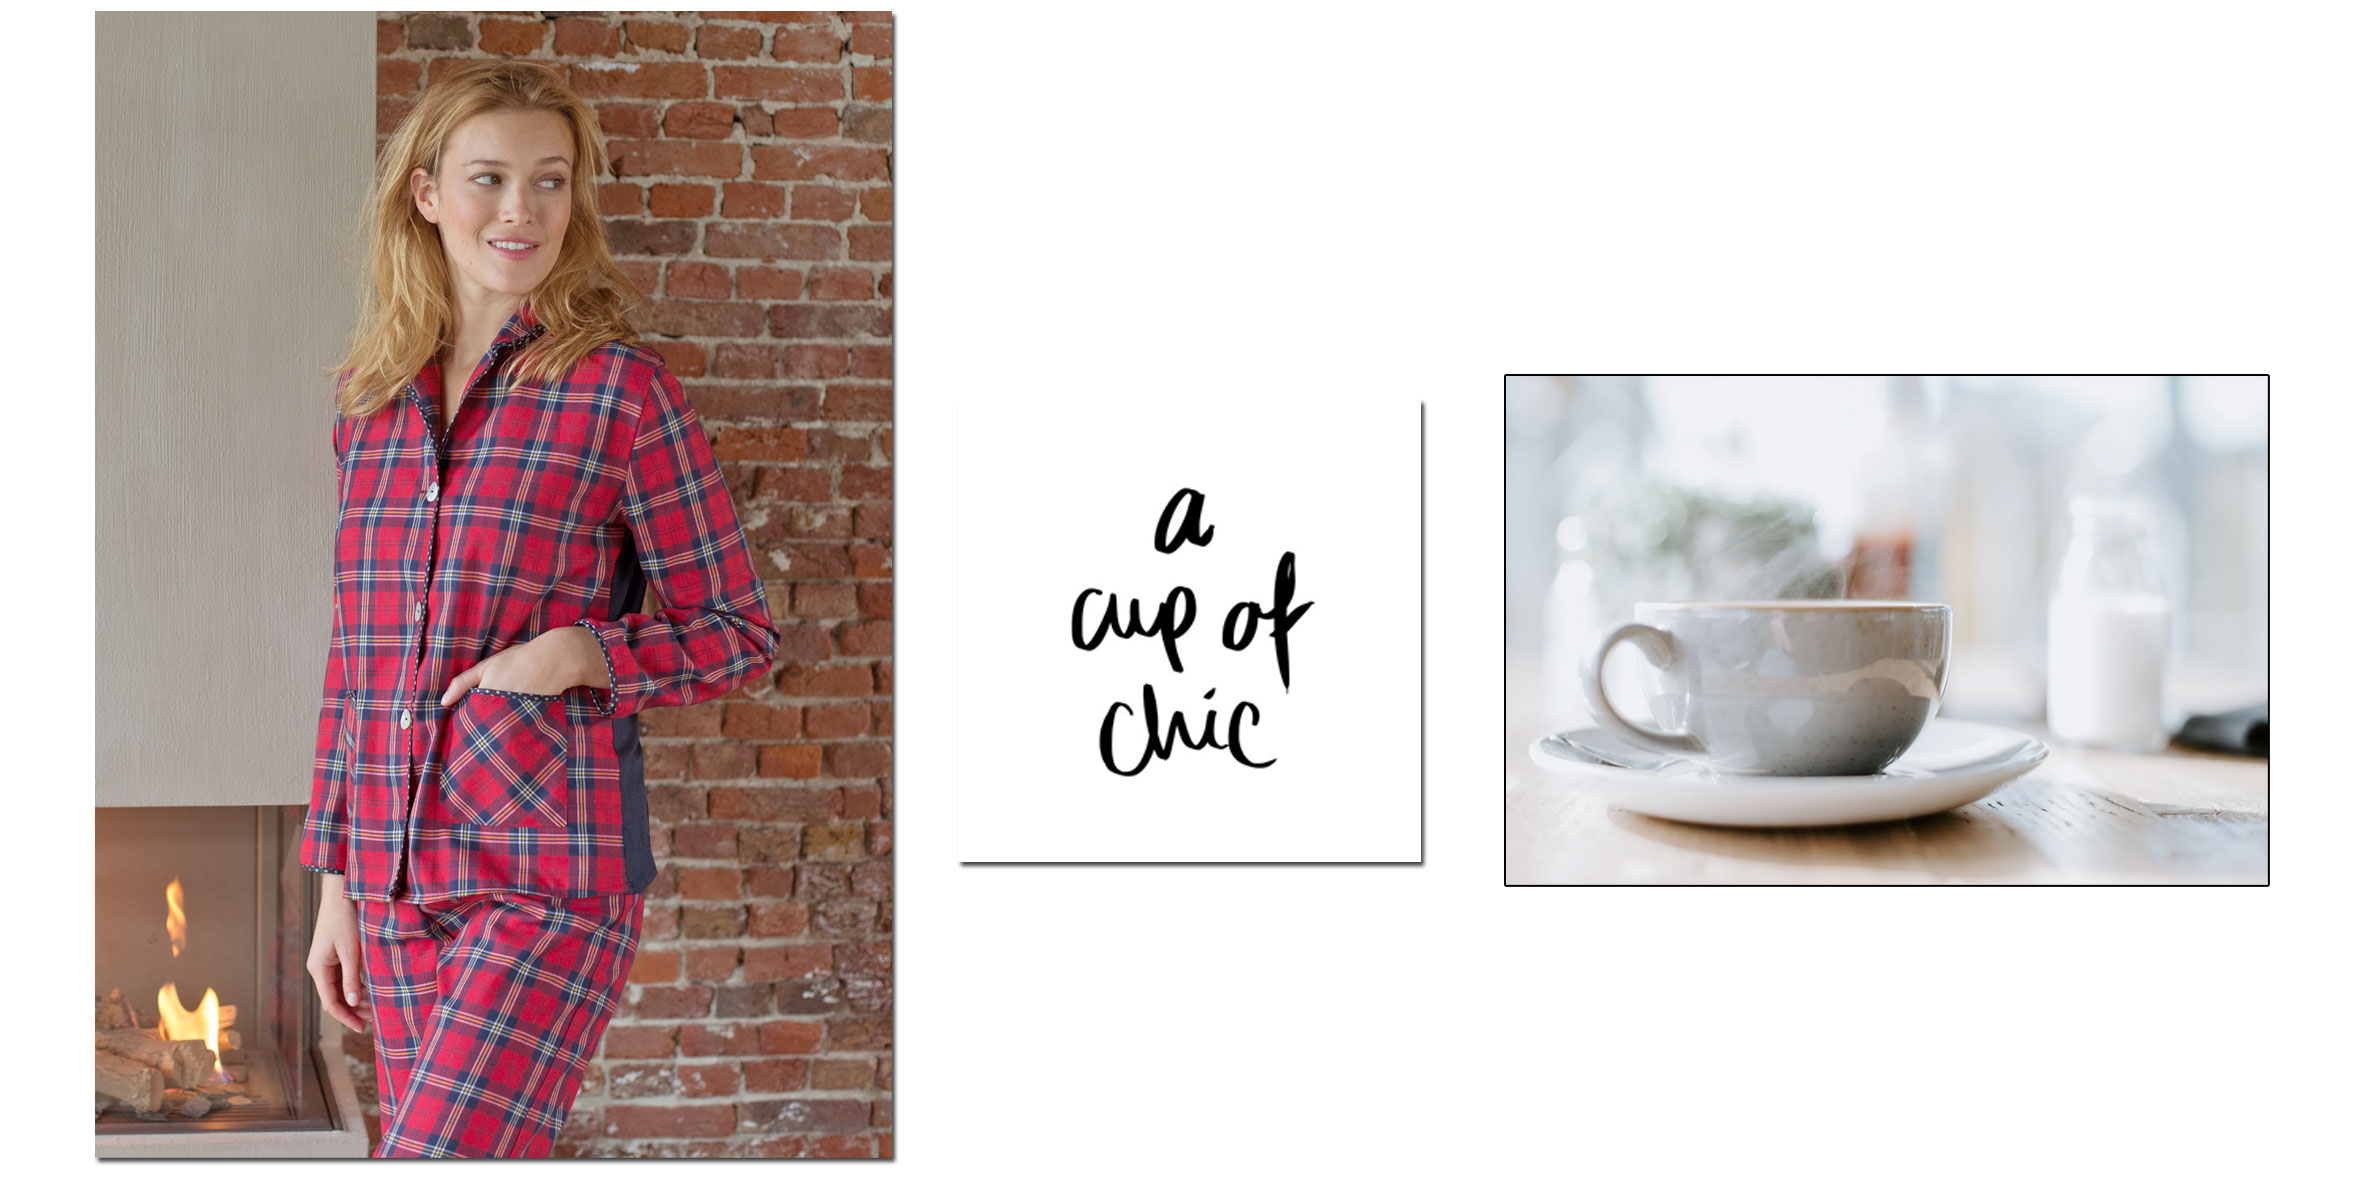 Fall for flannelette pyjamas this winter - Le Chat